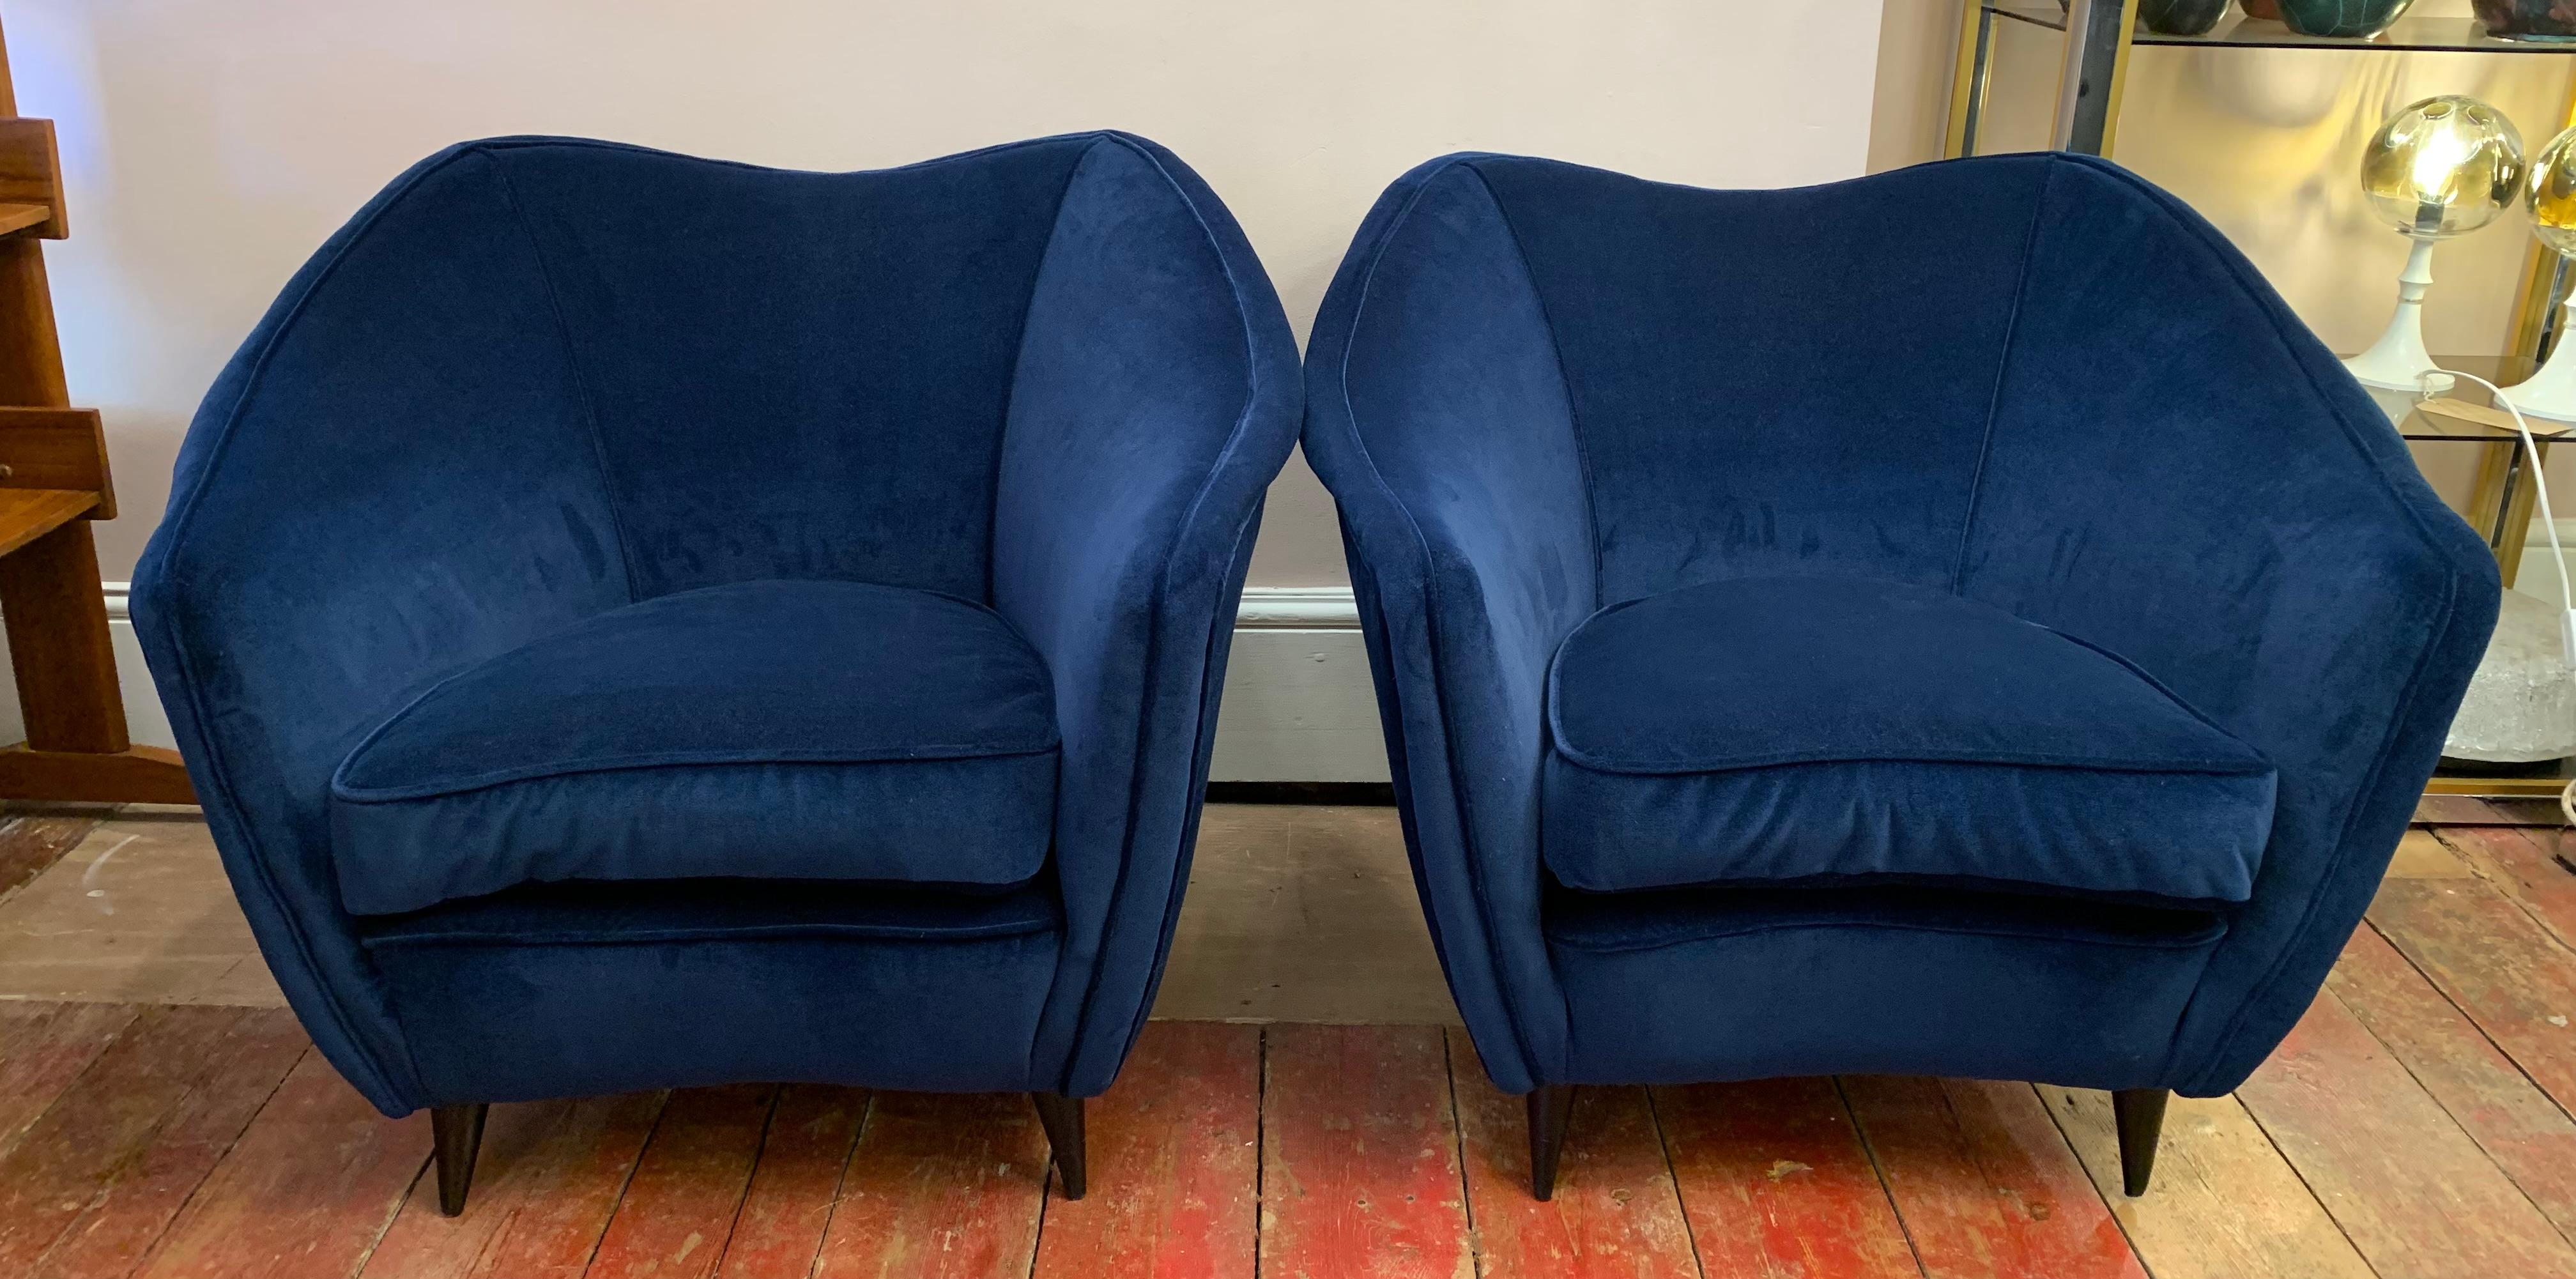 An absolutely stunning pair of 1930s Italian Gio Ponti armchairs designed for Casa e Giardino. The armchairs have been fully restored and reupholstered in a Sapphire Blue soft velvet fabric with piping along the front of the curvaceous arms and